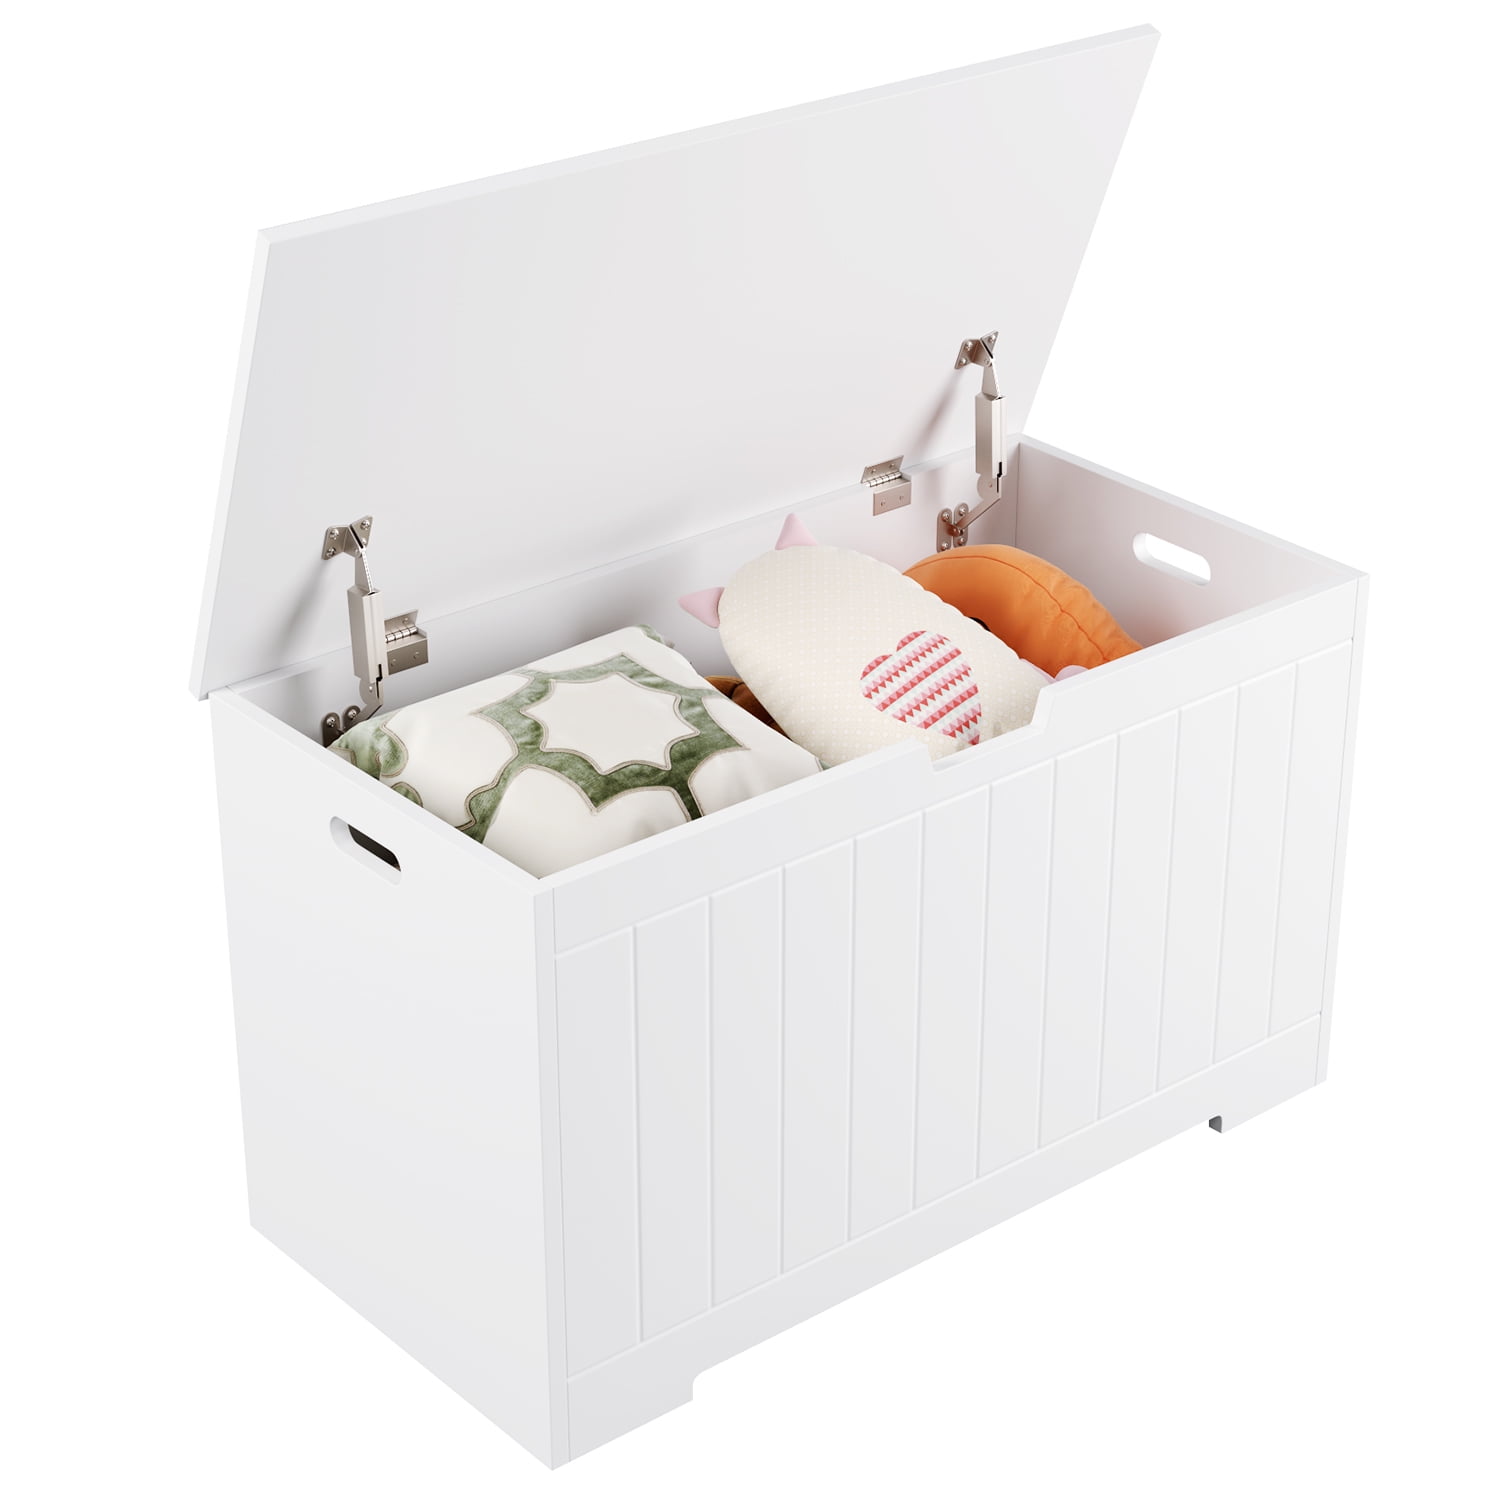 NEW WHITE WOODEN TOY BOX STORAGE UNIT CHILDREN KIDS CHEST BOXES BENCH STRONG UK 